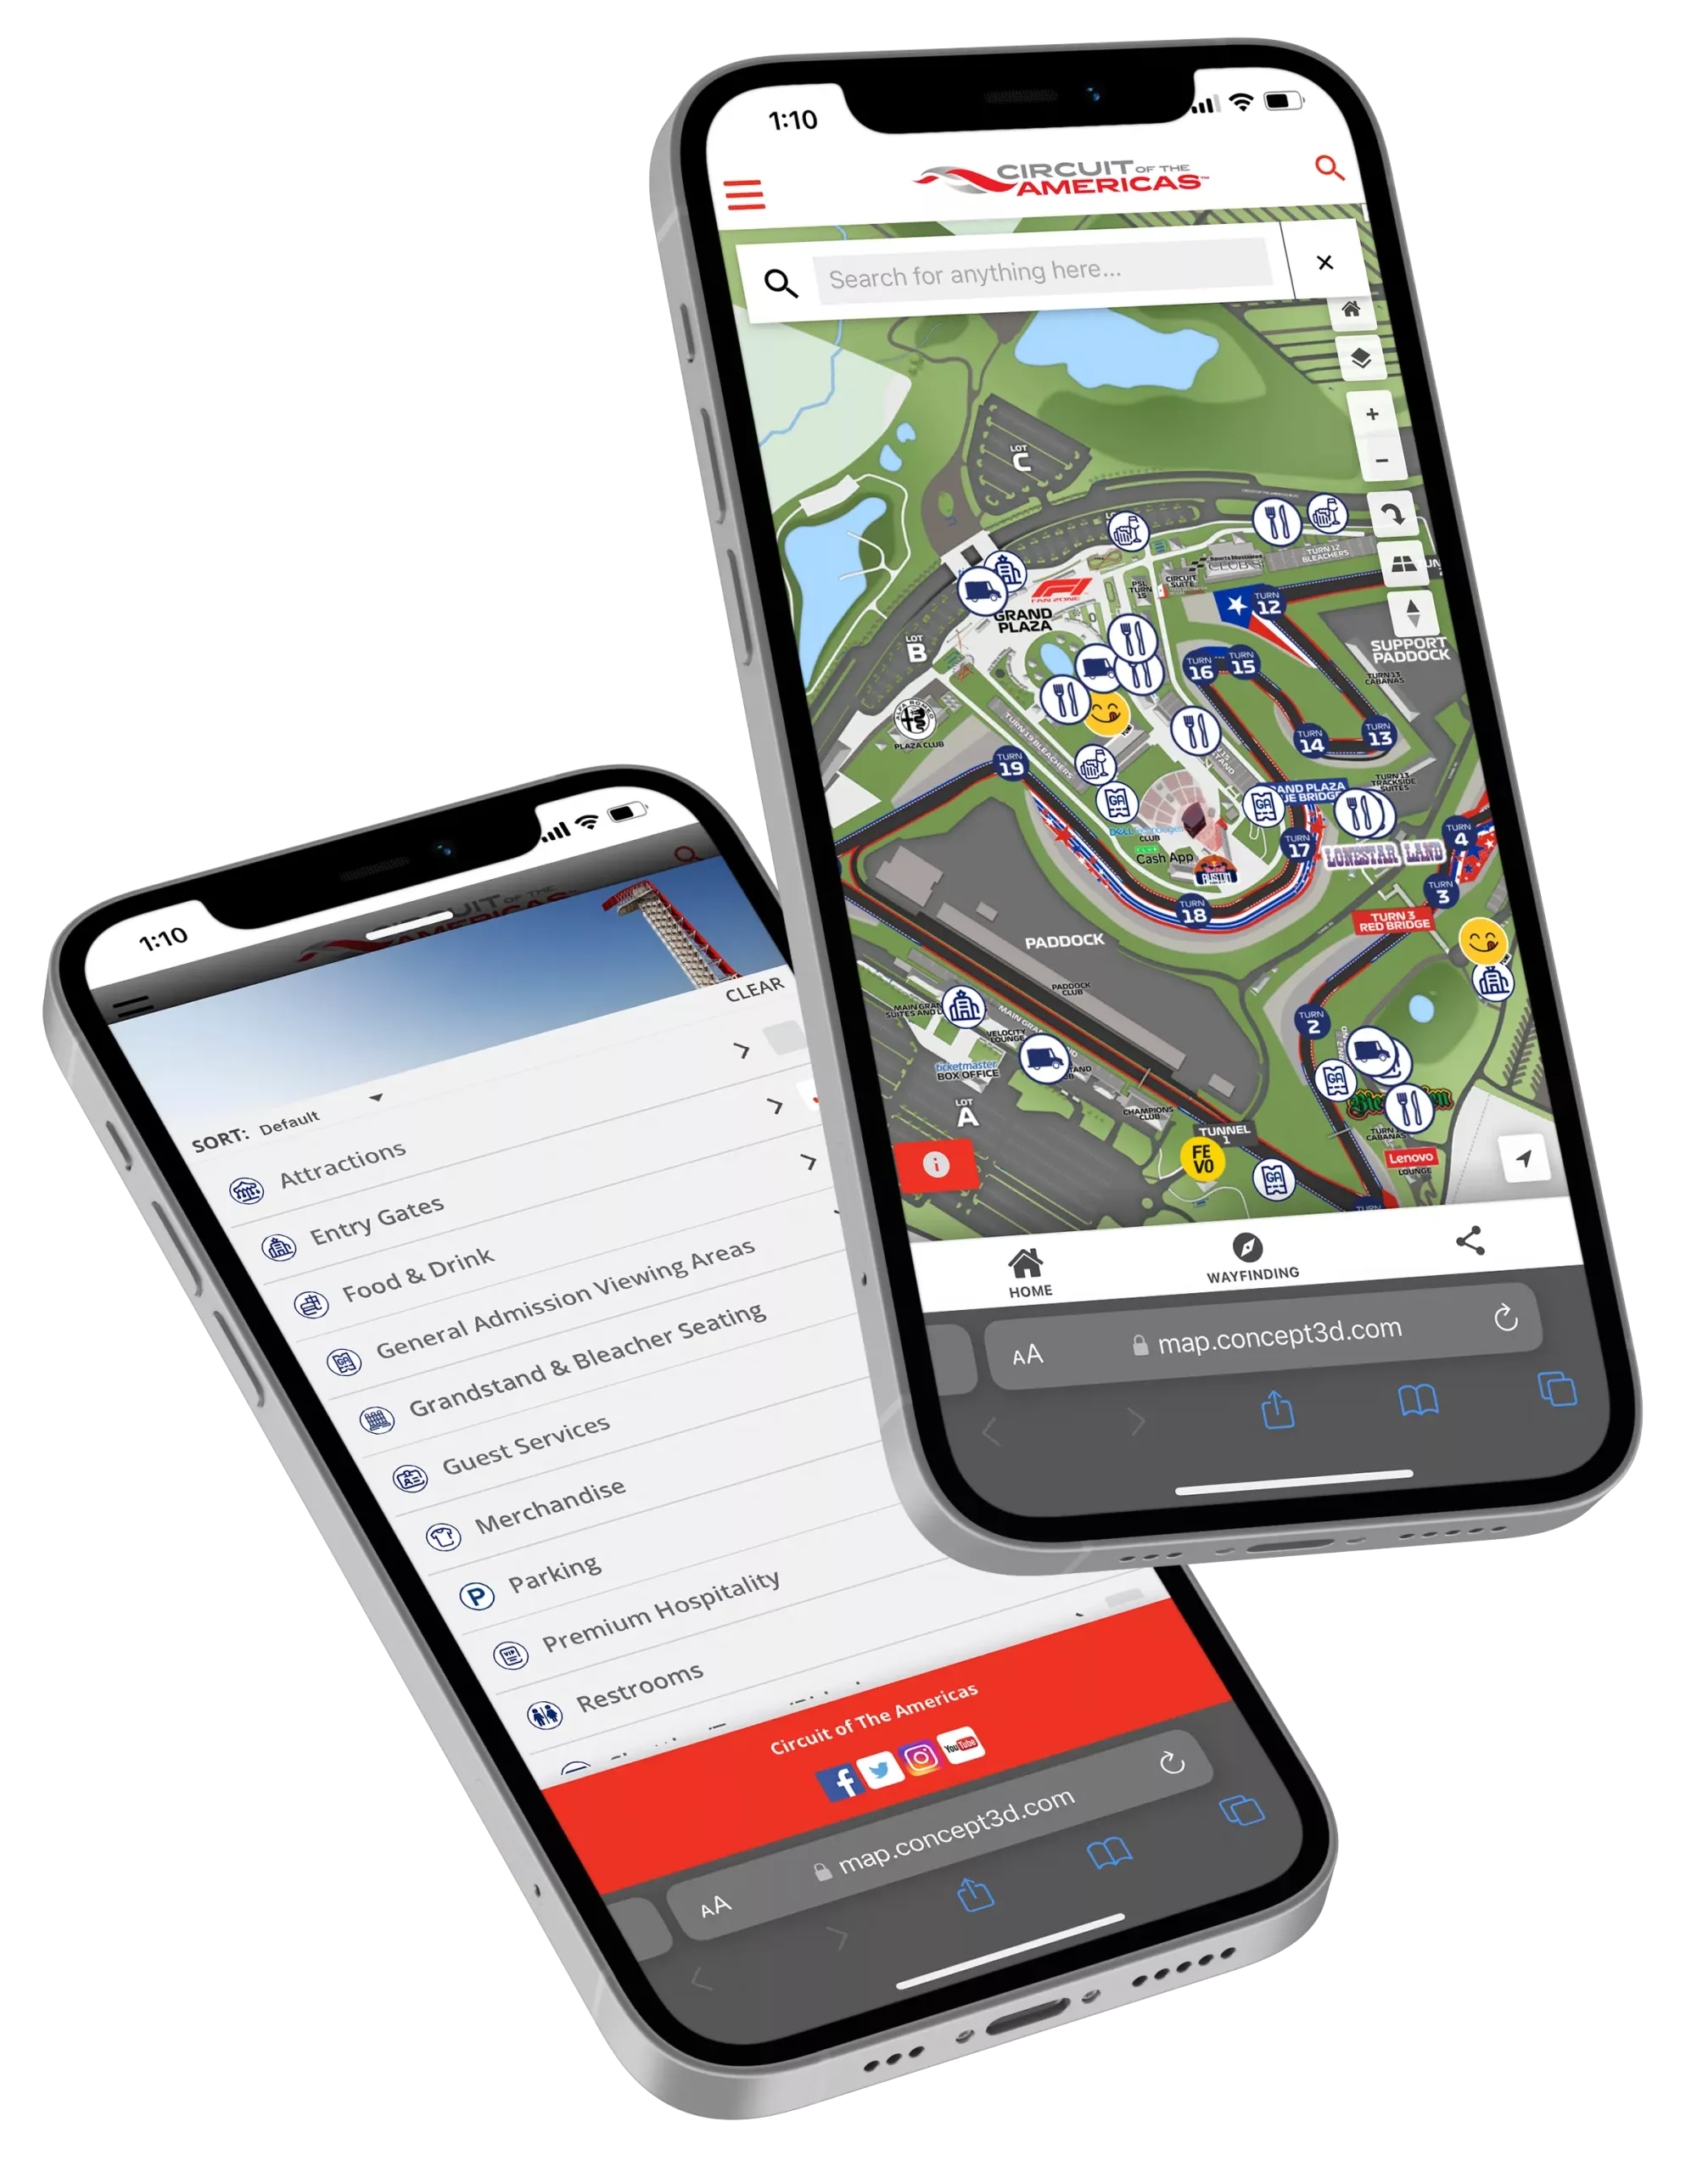 Circuit of the americas interactive map displayed on 2 floating phones